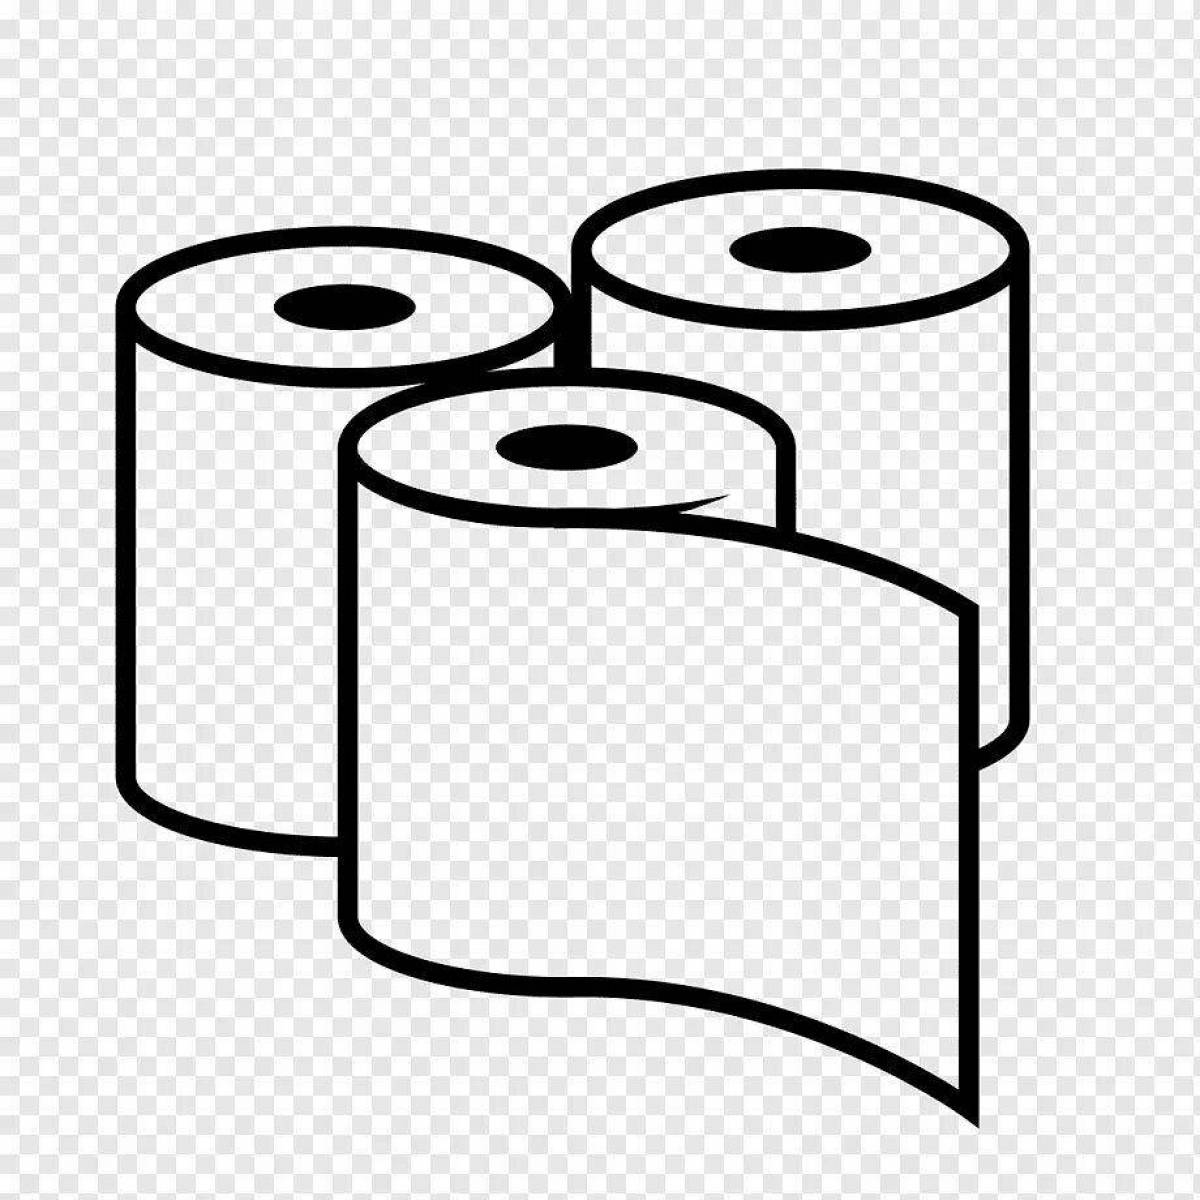 Playful toilet paper coloring page